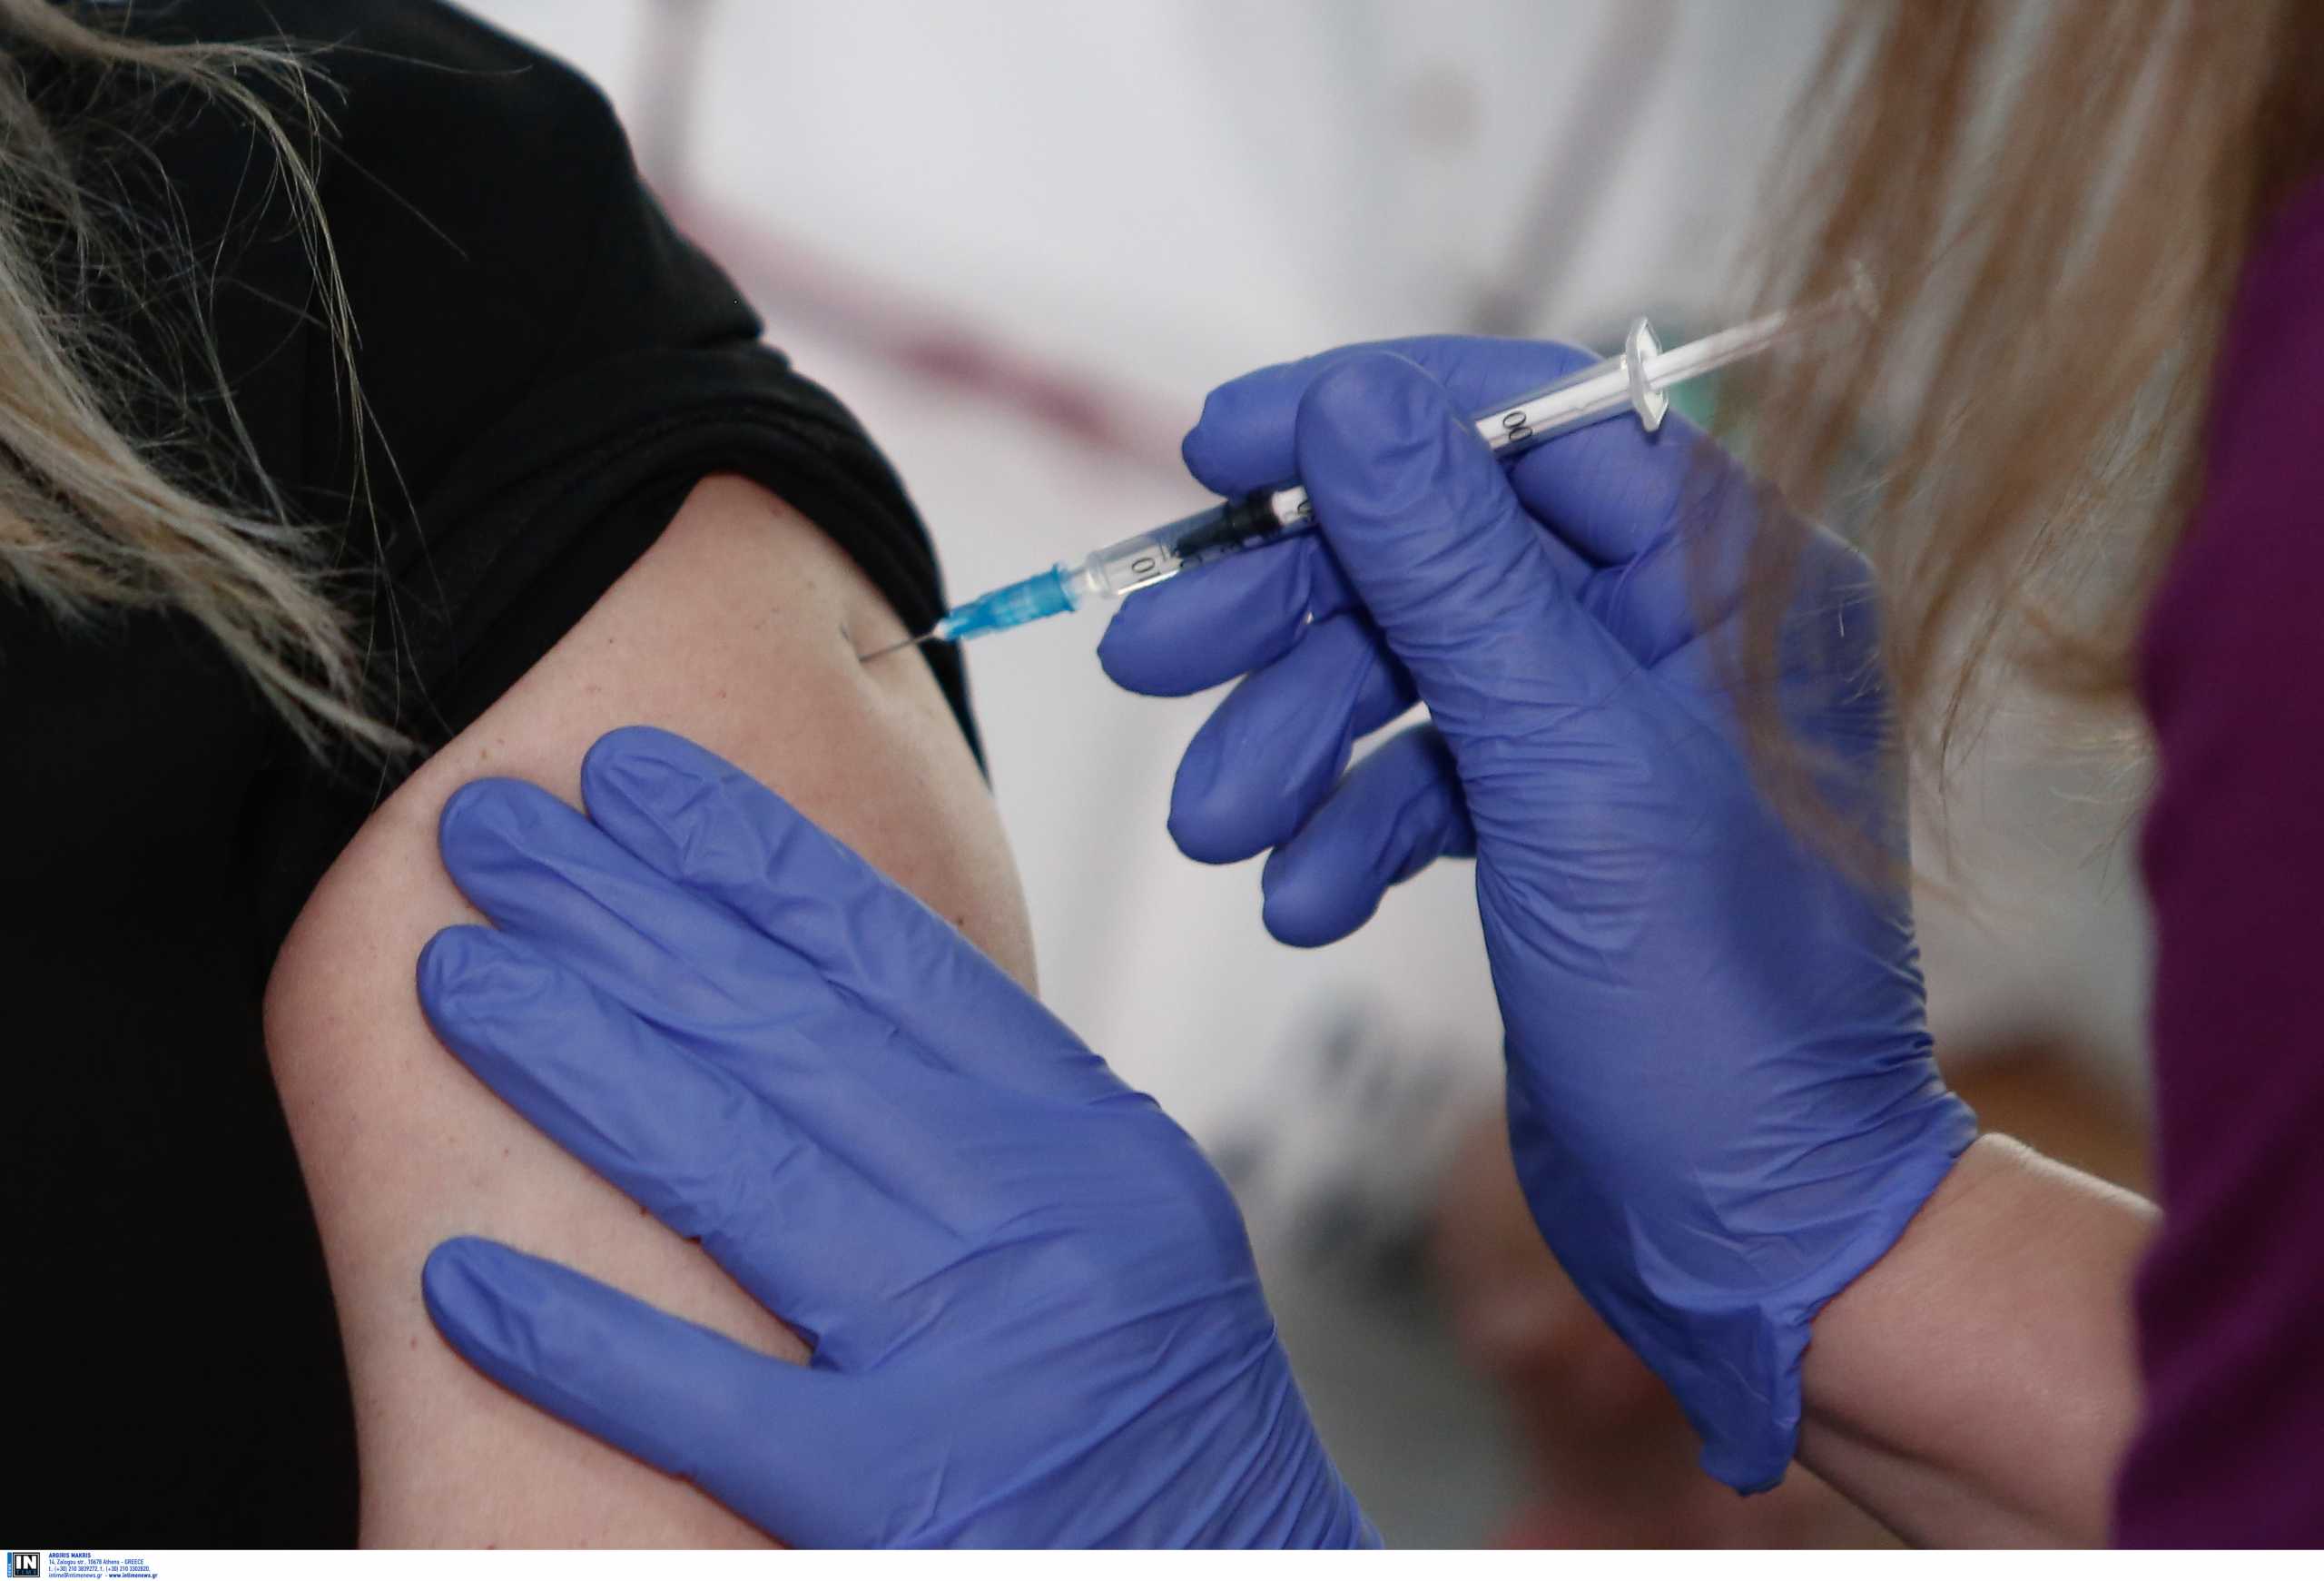 France: Considerations for mandatory vaccination of health personnel in September